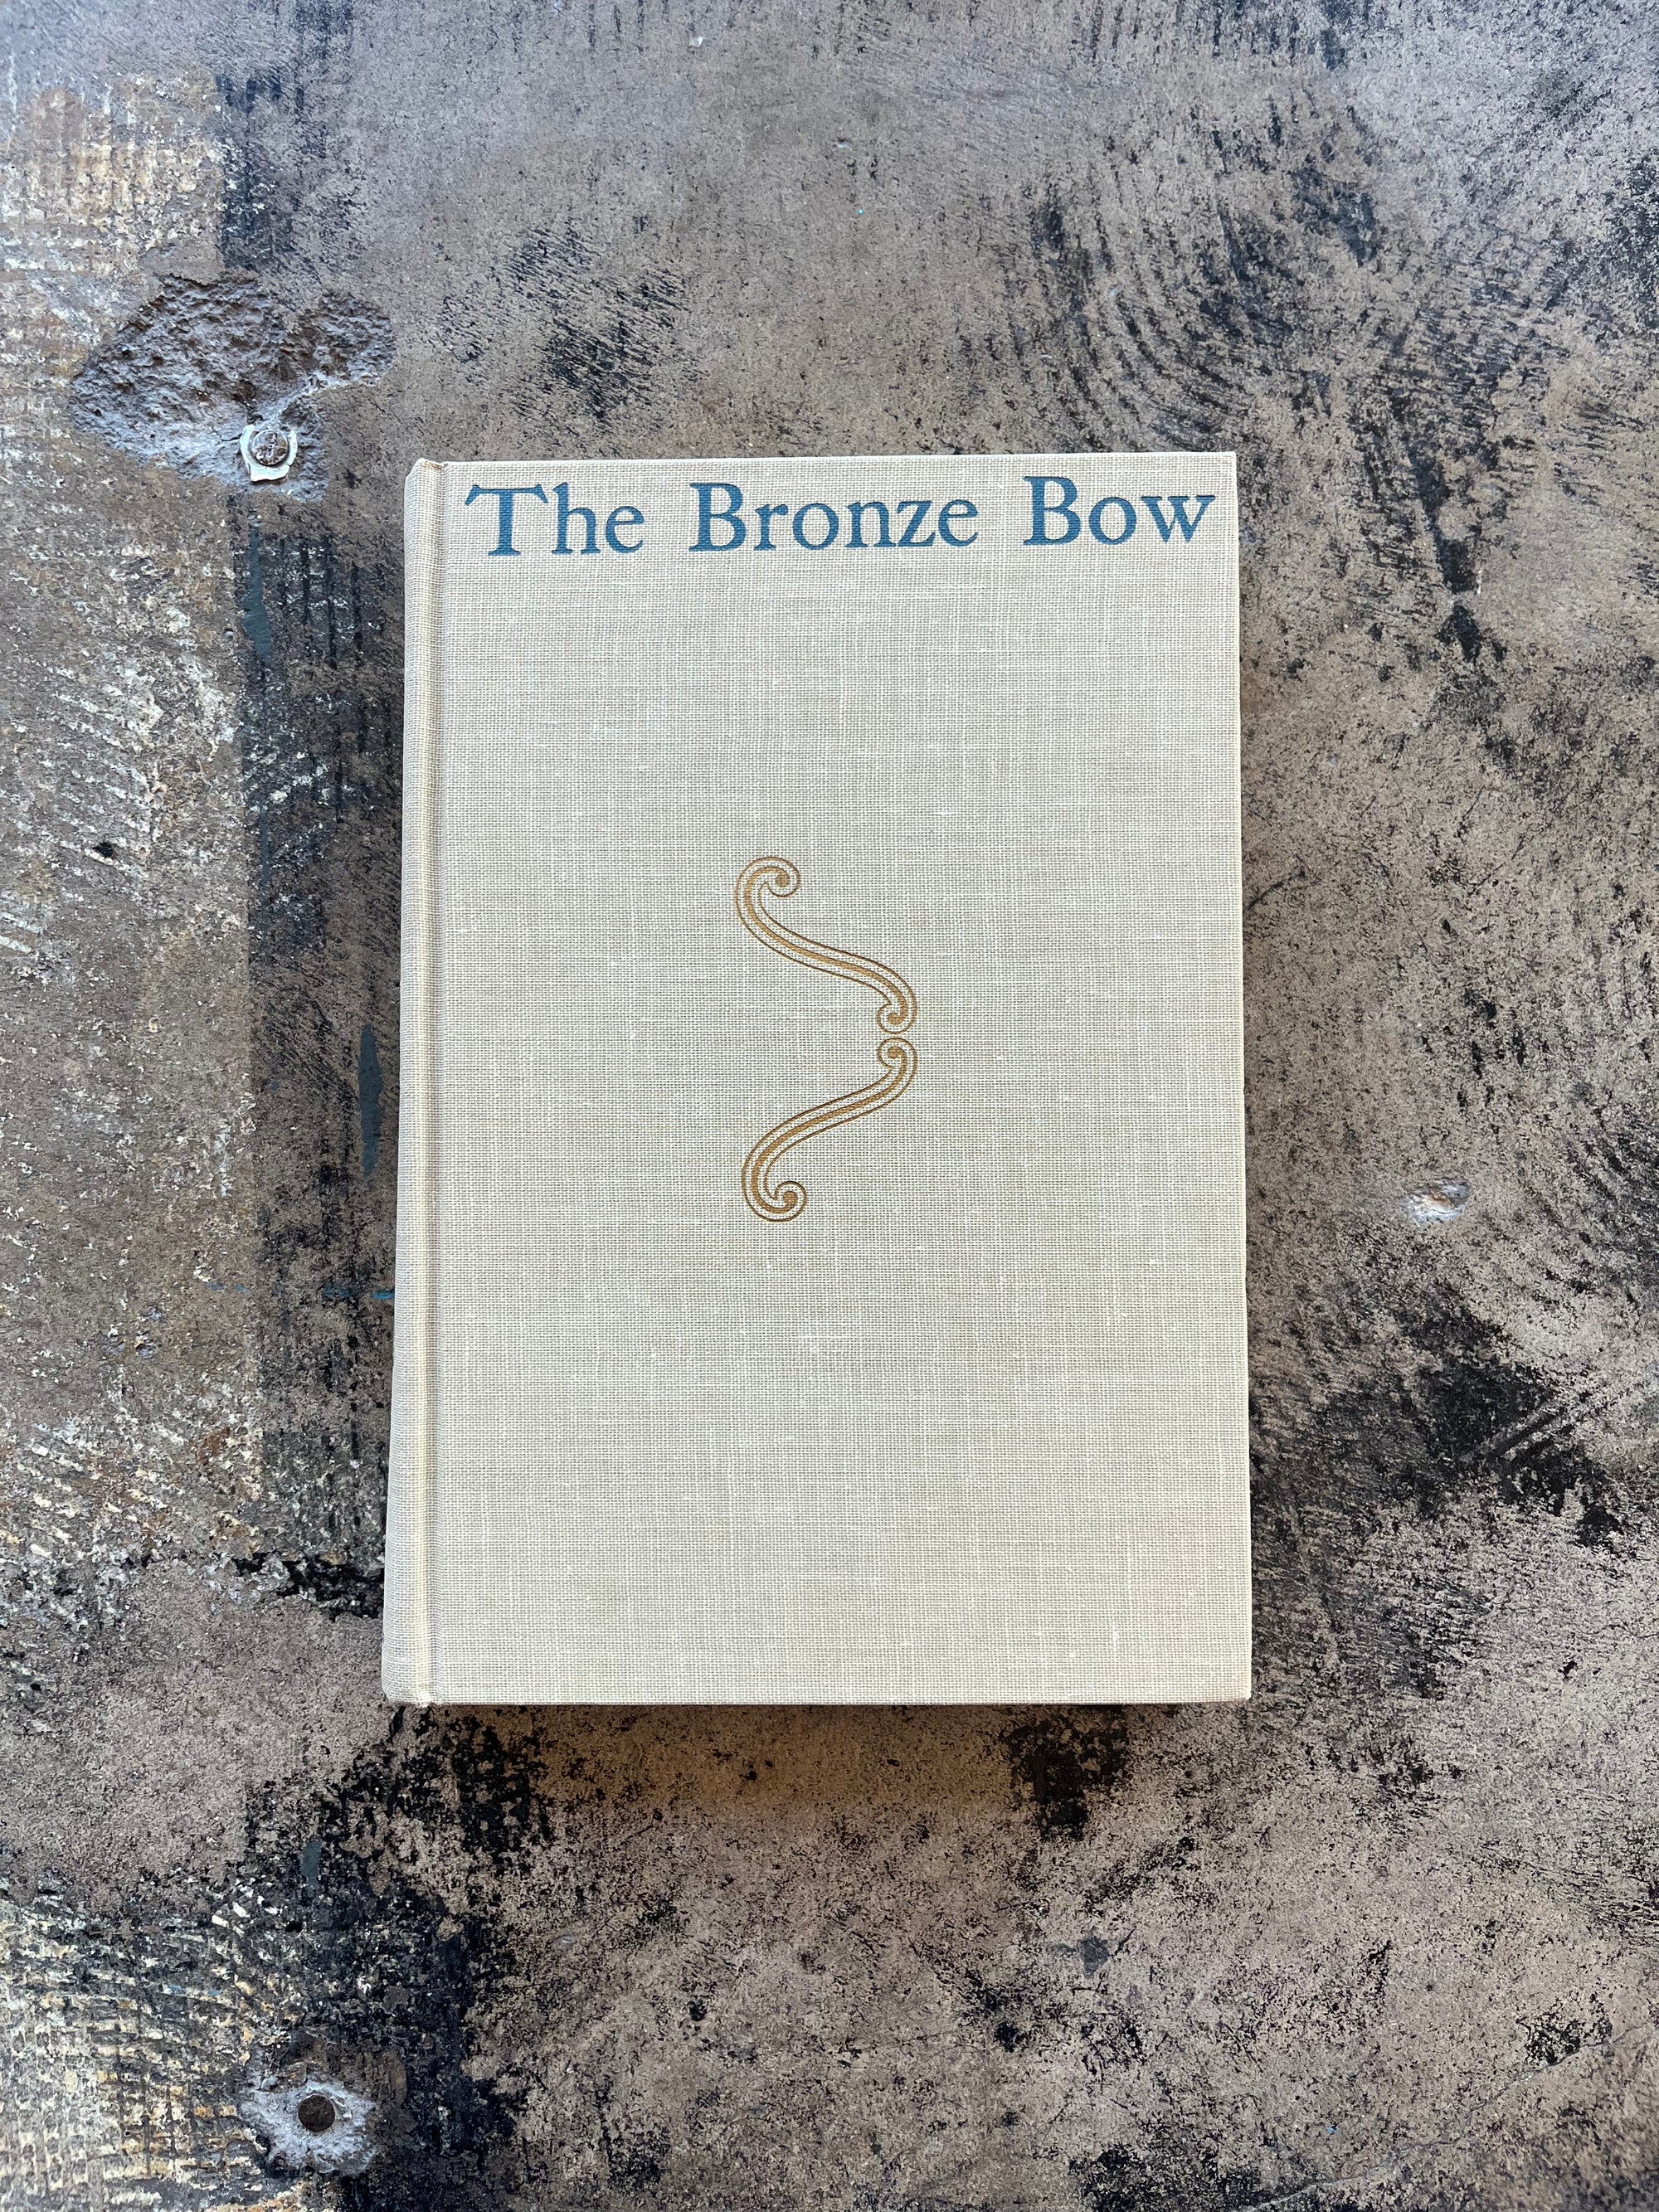 "The Bronze Bow" Book